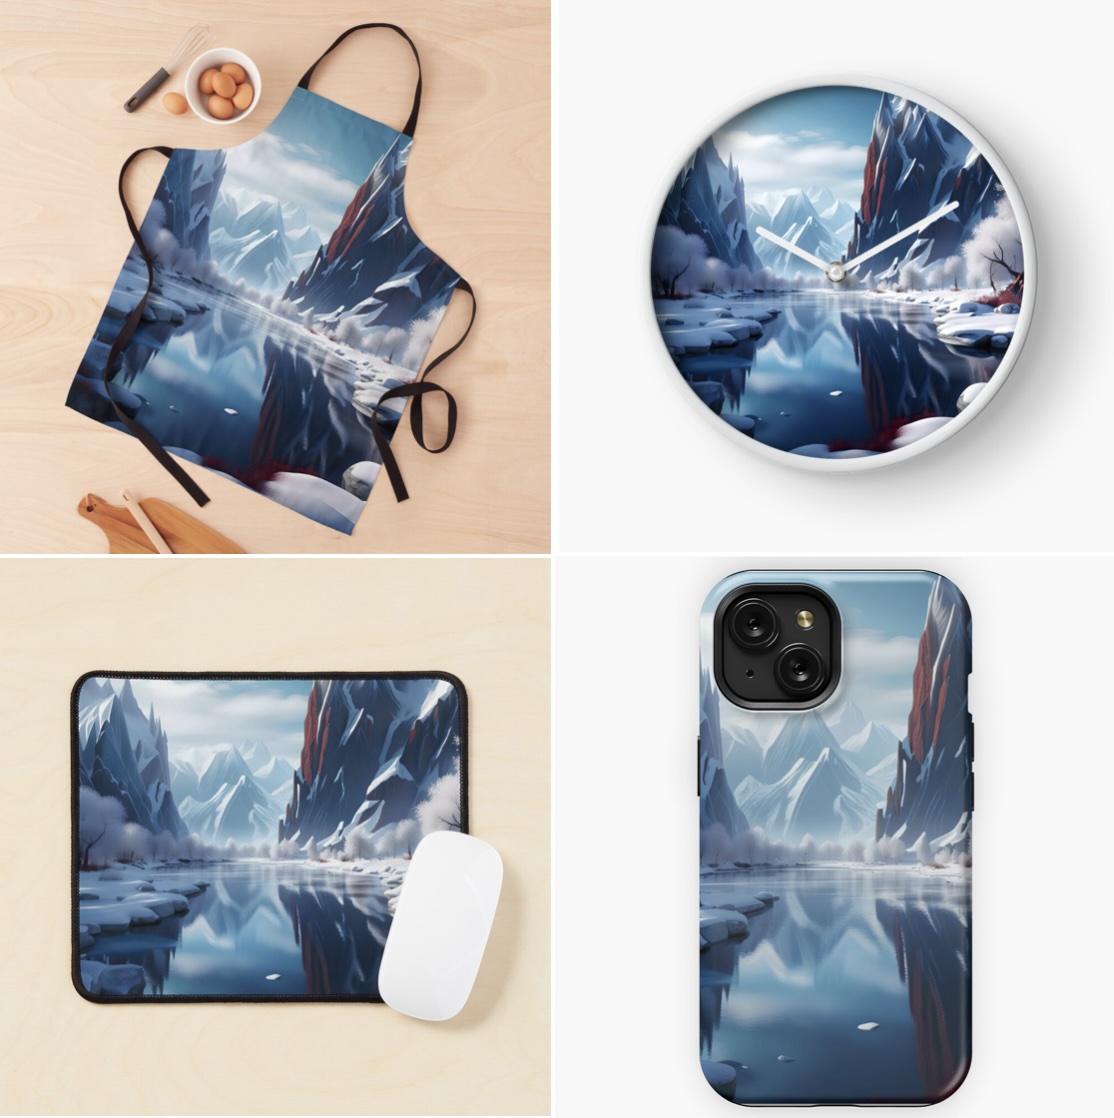 <#Winter #Riverscape and Ice Mountains> #AICreation on #Apron #iPhoneCase #Clock #MousePad on my #Redbubble and #teepublic

redbubble.com/shop/ap/160422…
teepublic.com/poster-and-art…

#landscape #waterreflection #homedecor #aidesign #aiartwork